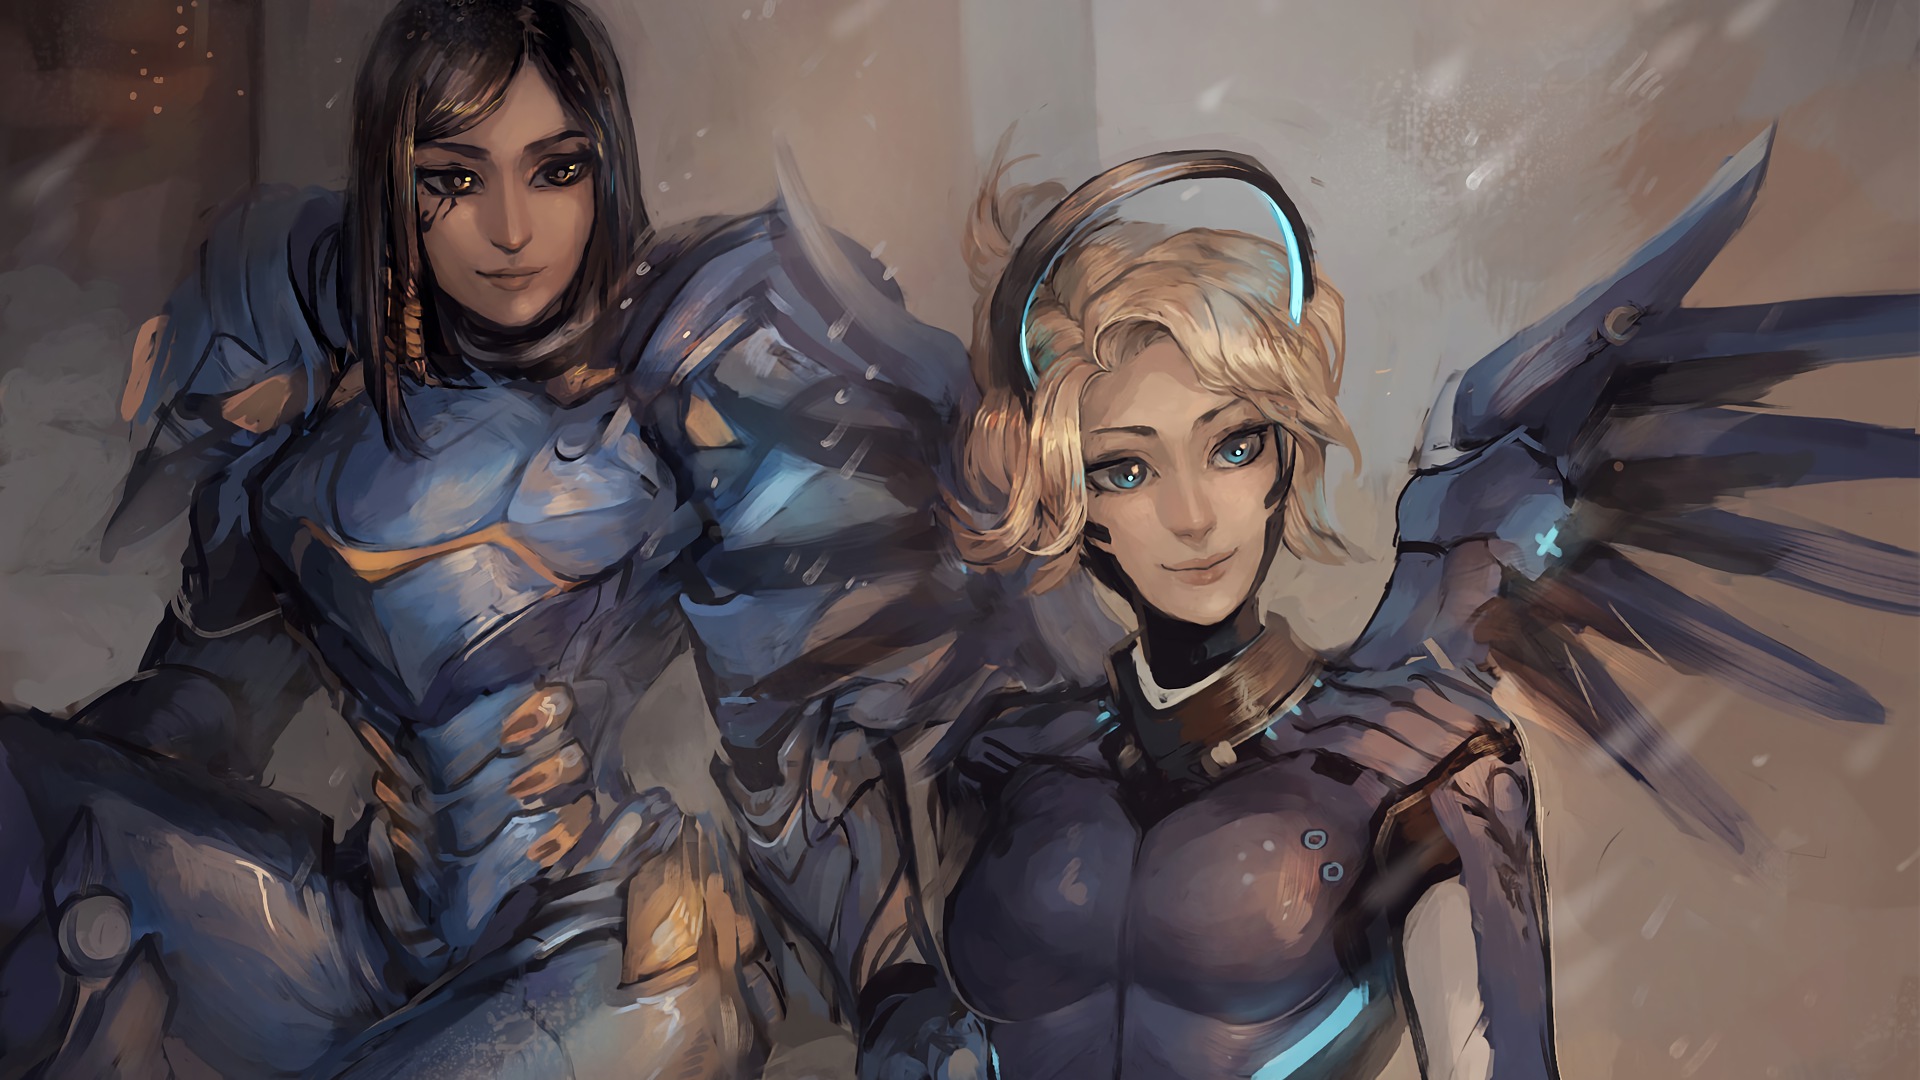 General 1920x1080 video games women Overwatch Pharah (Overwatch) Mercy (Overwatch) Blizzard Entertainment video game characters